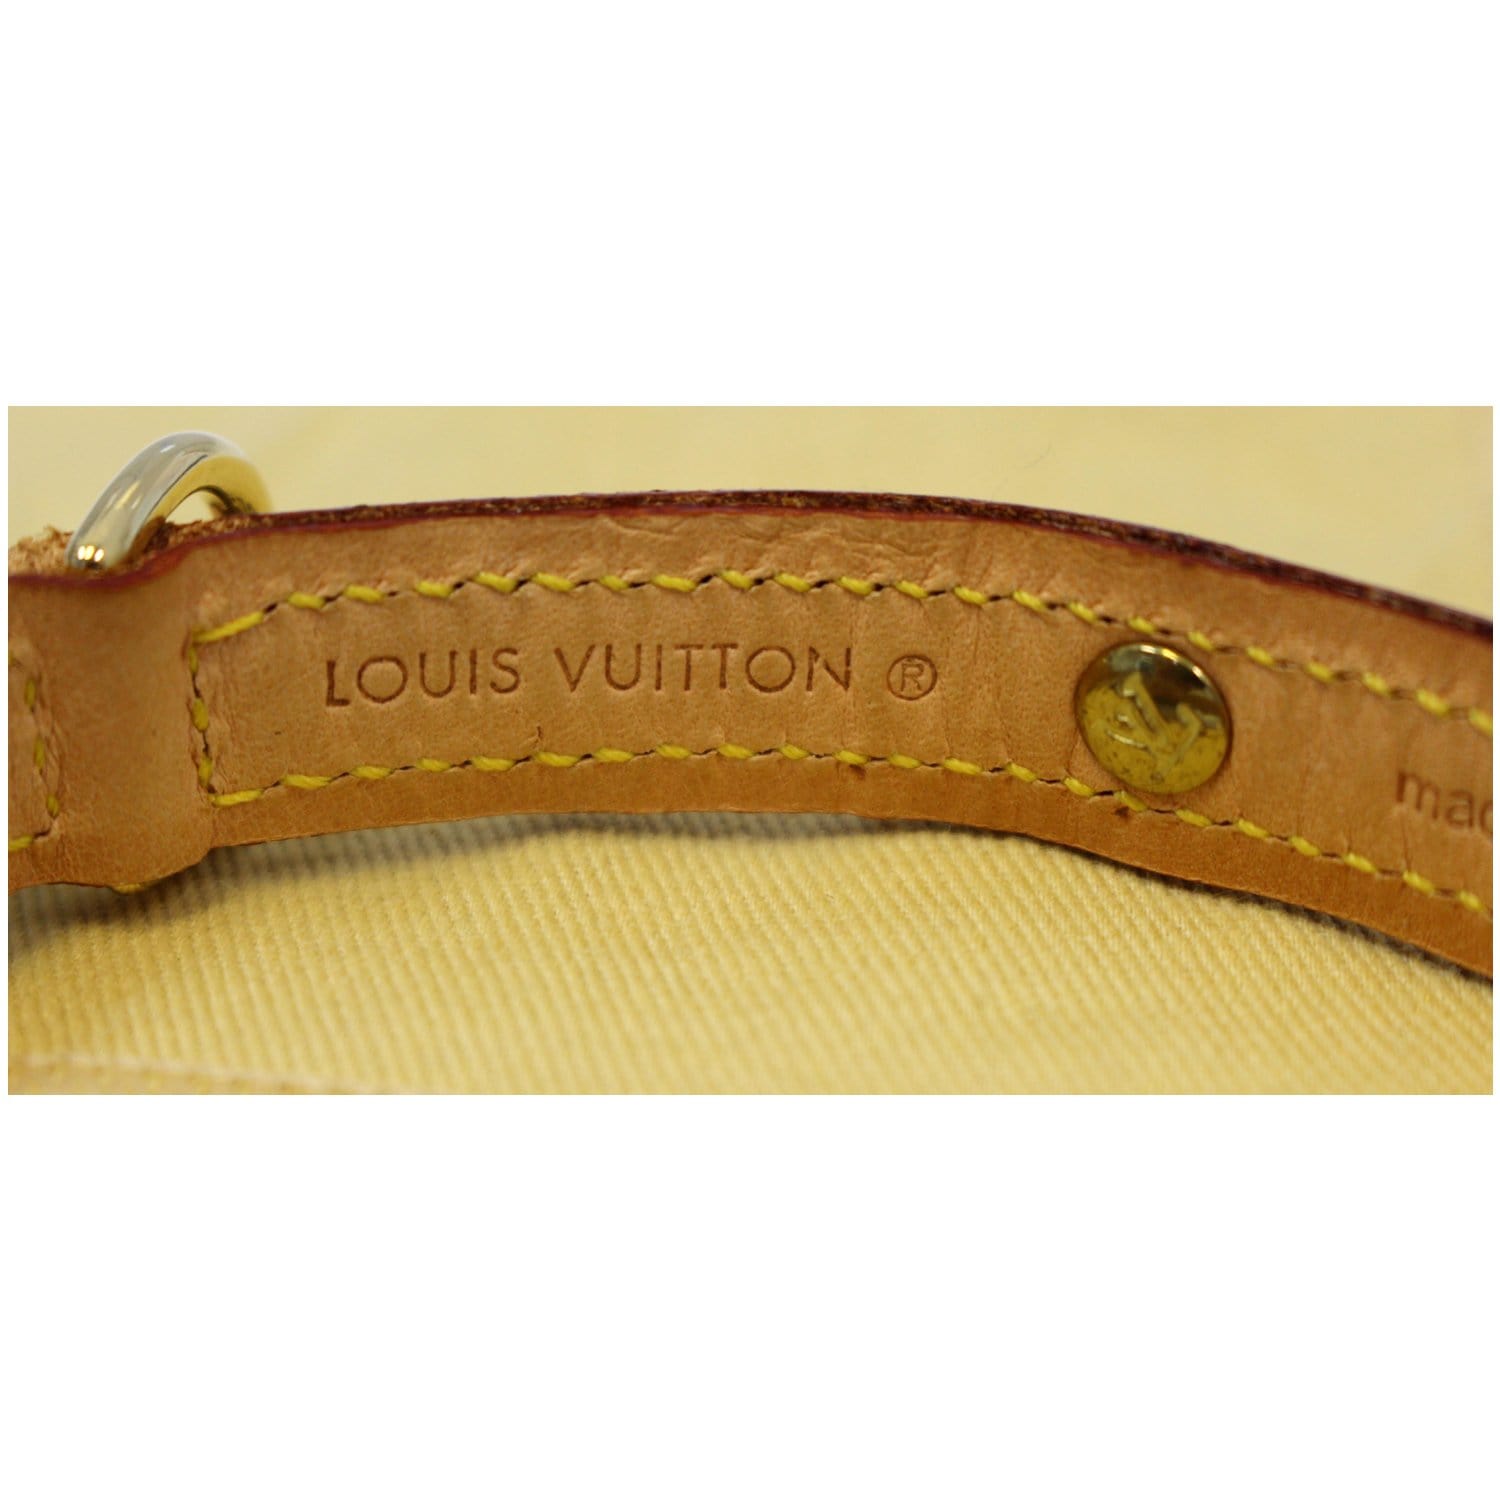 Louis Vuitton Collier Baxter PM Collar Monogram Brown For small dogs F/S  From JP